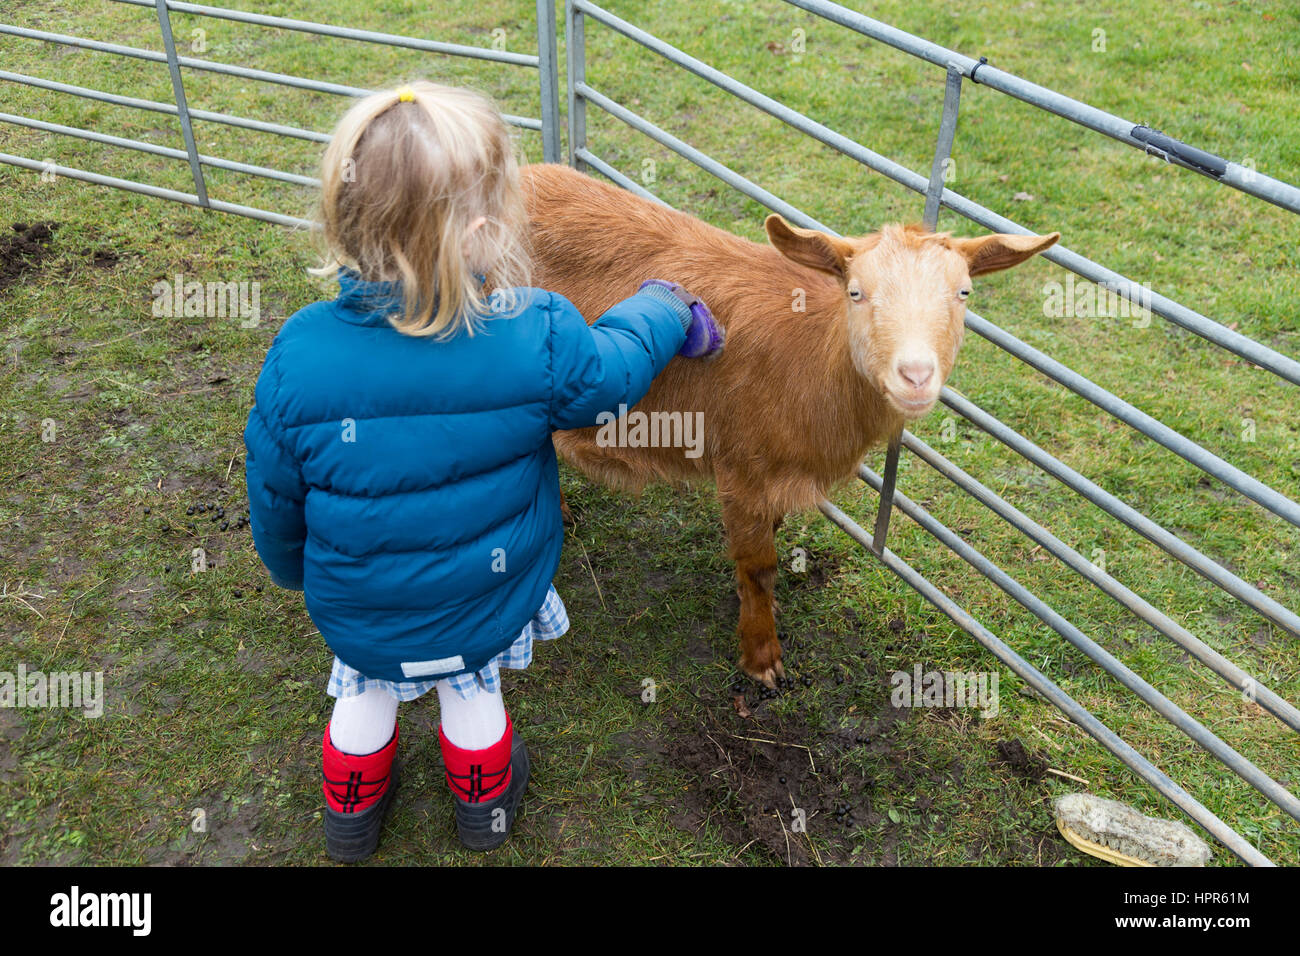 A two year old child / toddler stroking and brushing a young goat / kid during a visit by a visiting urban farm to a suburban town / school. UK. (86) Stock Photo